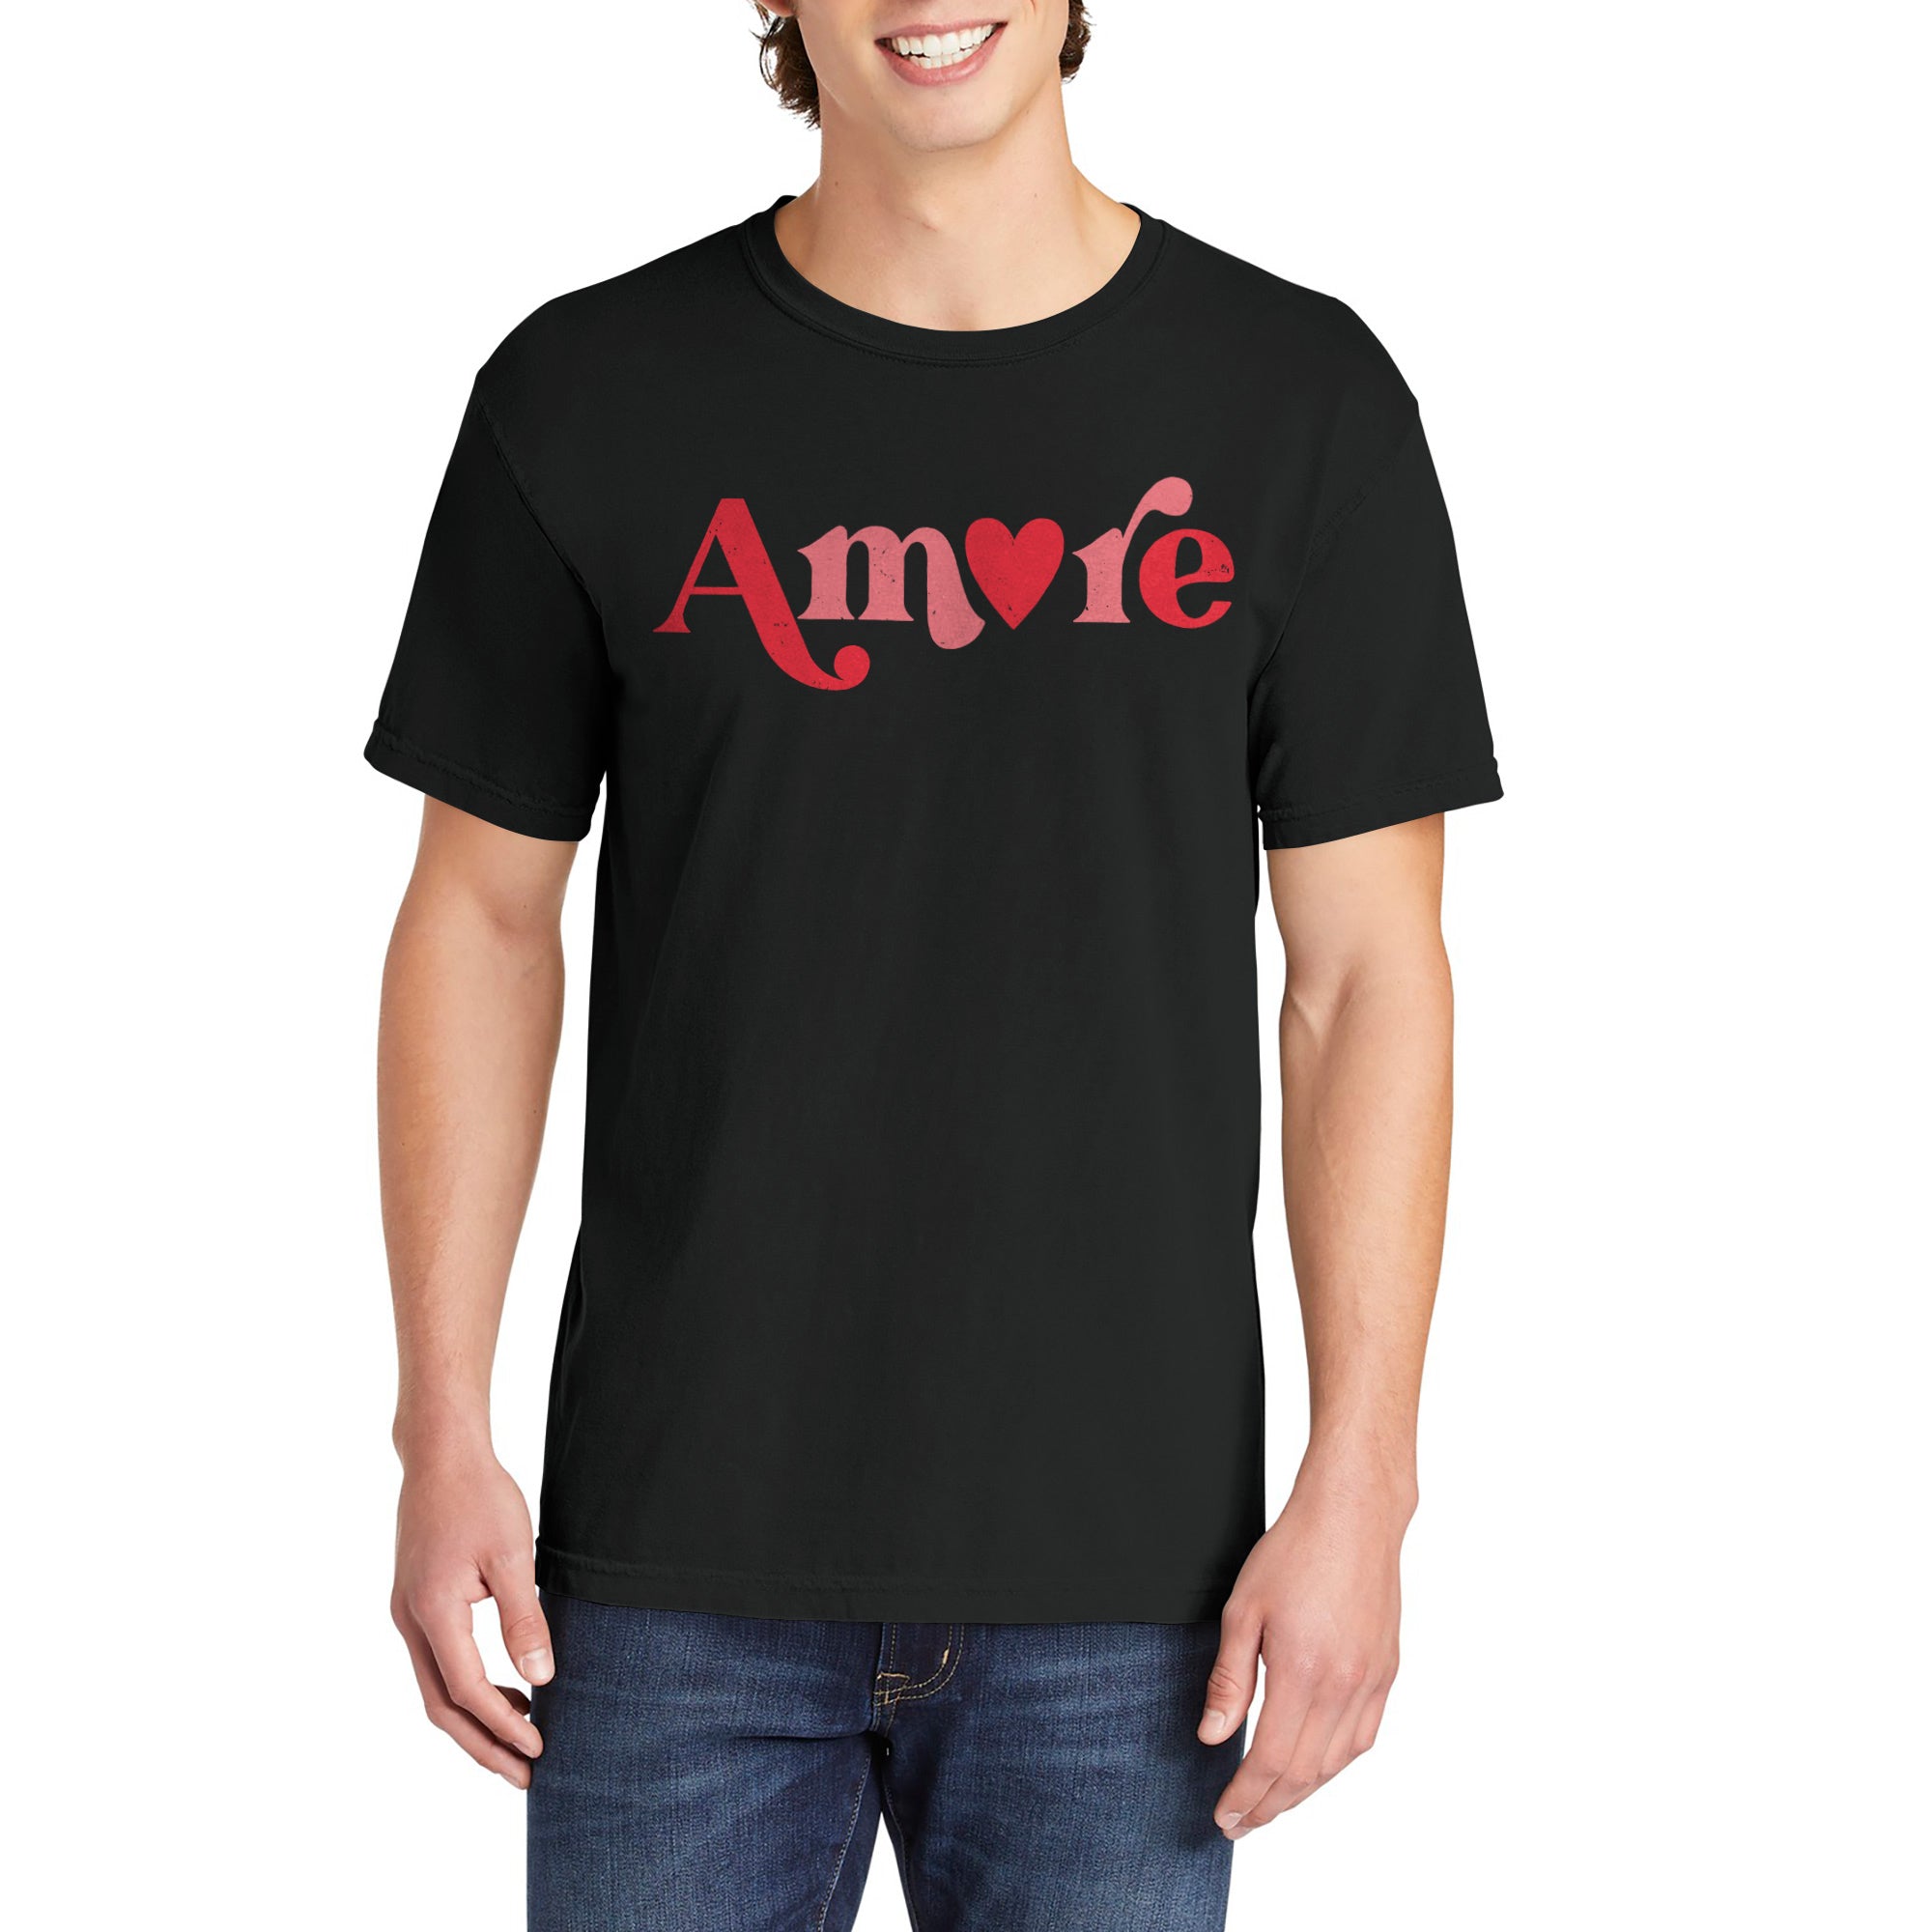 Amore Valentines Shirt Garment-Dyed Tee